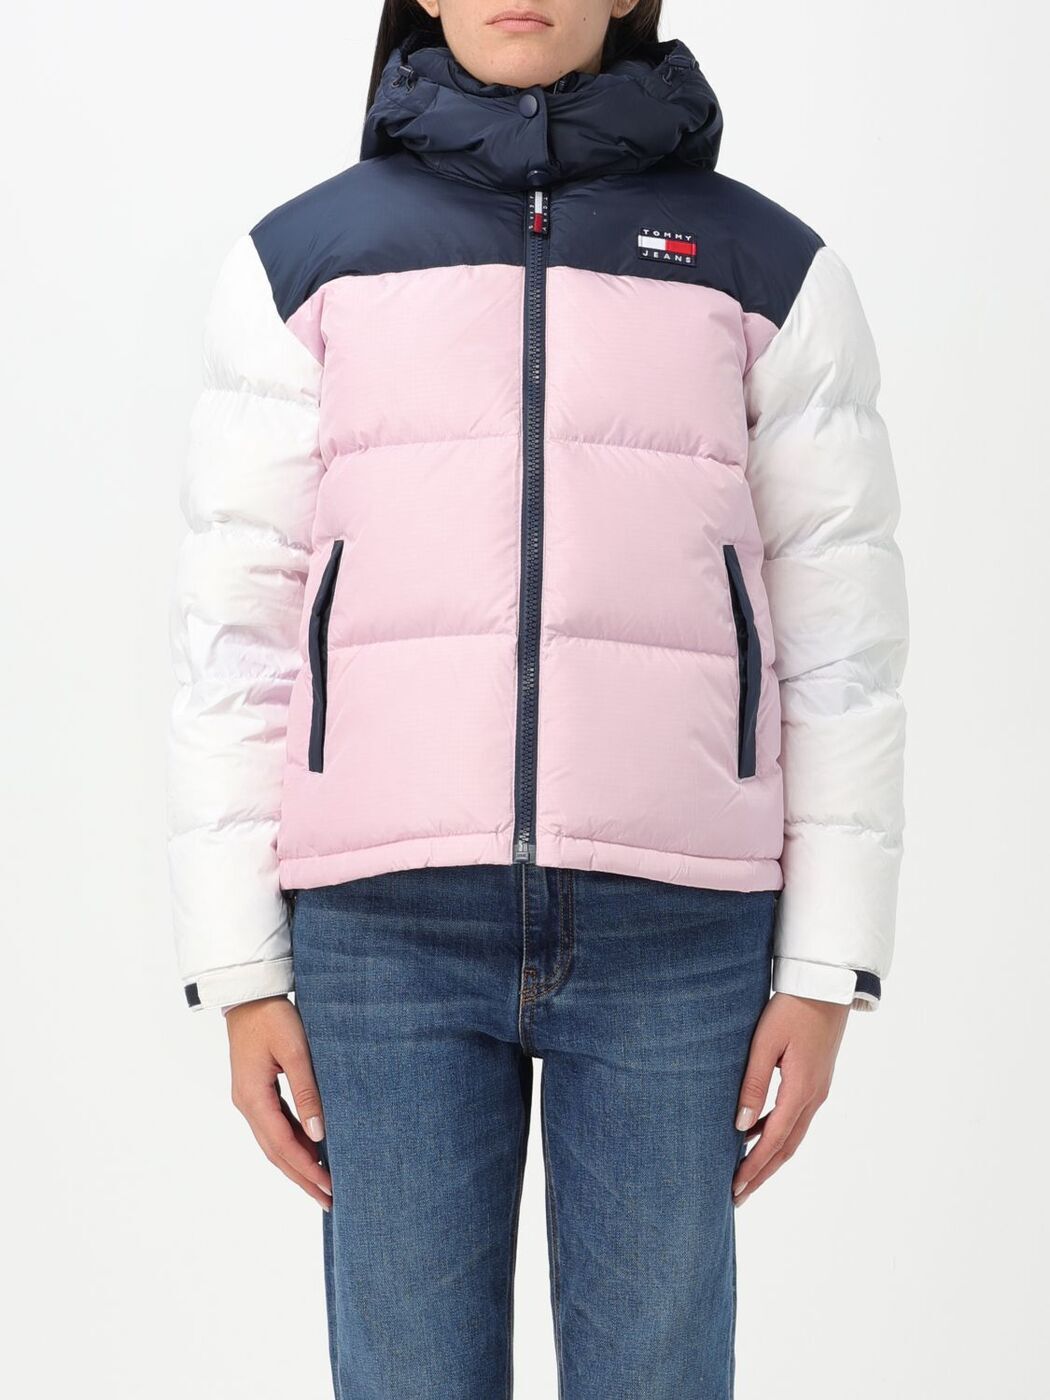 TOMMY JEANS トミー ジーンズ ピンク Pink ジャケット レディース 秋冬2023 DW0DW14288 【関税・送料無料】【ラッピング無料】 gi